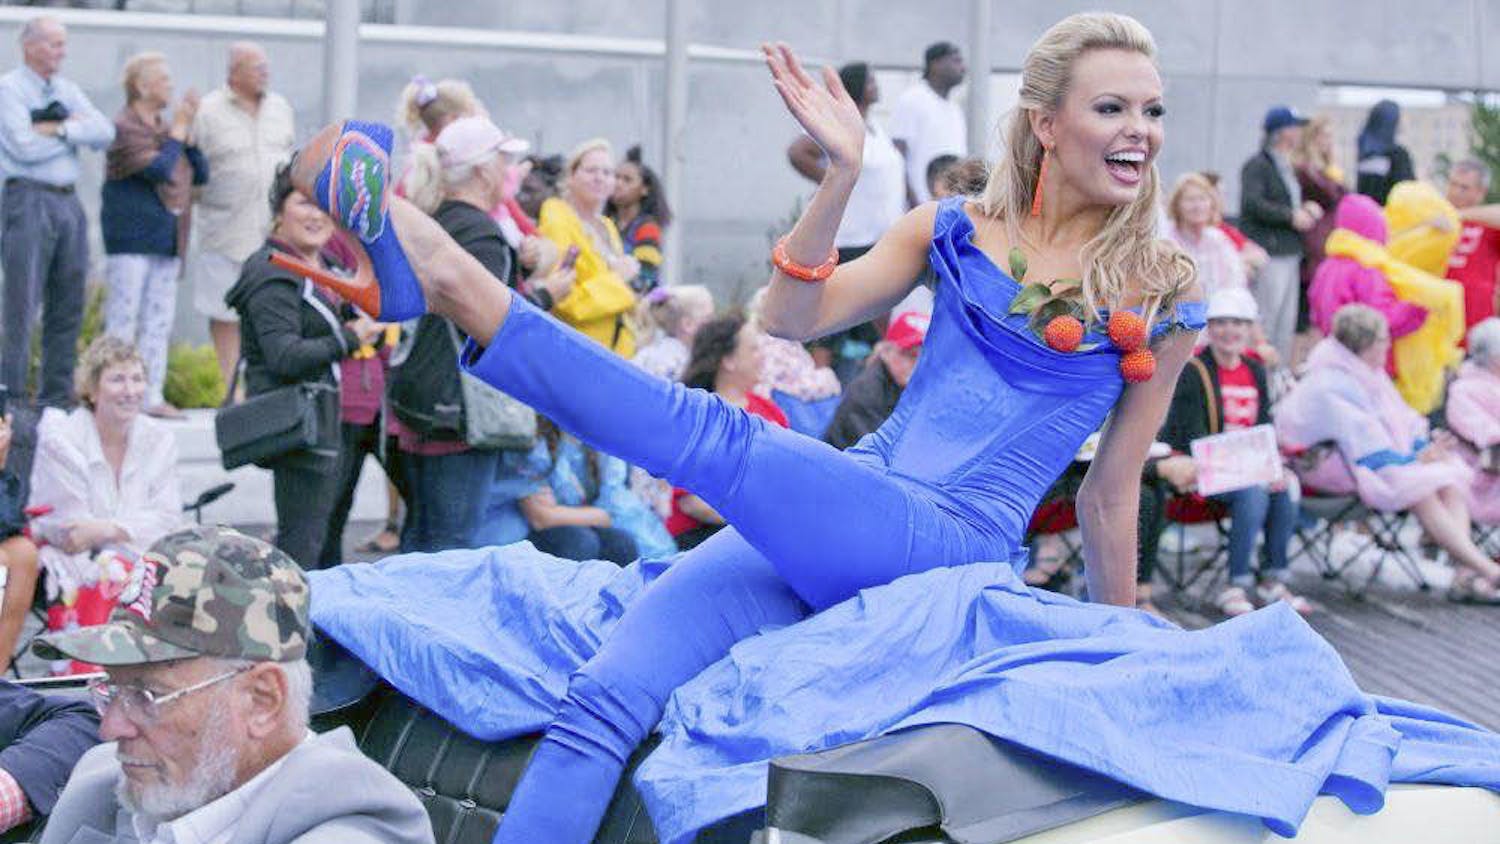 Mary Katherine Fechel, 20, participates in the Show Me Your Shoes parade in Atlantic City Sept. 12, 2015, as a part of Miss America contestant traditions.Candidates wore shoes to represent their state. “It was such a testament that the Gator nation is everywhere,” Fechel said.